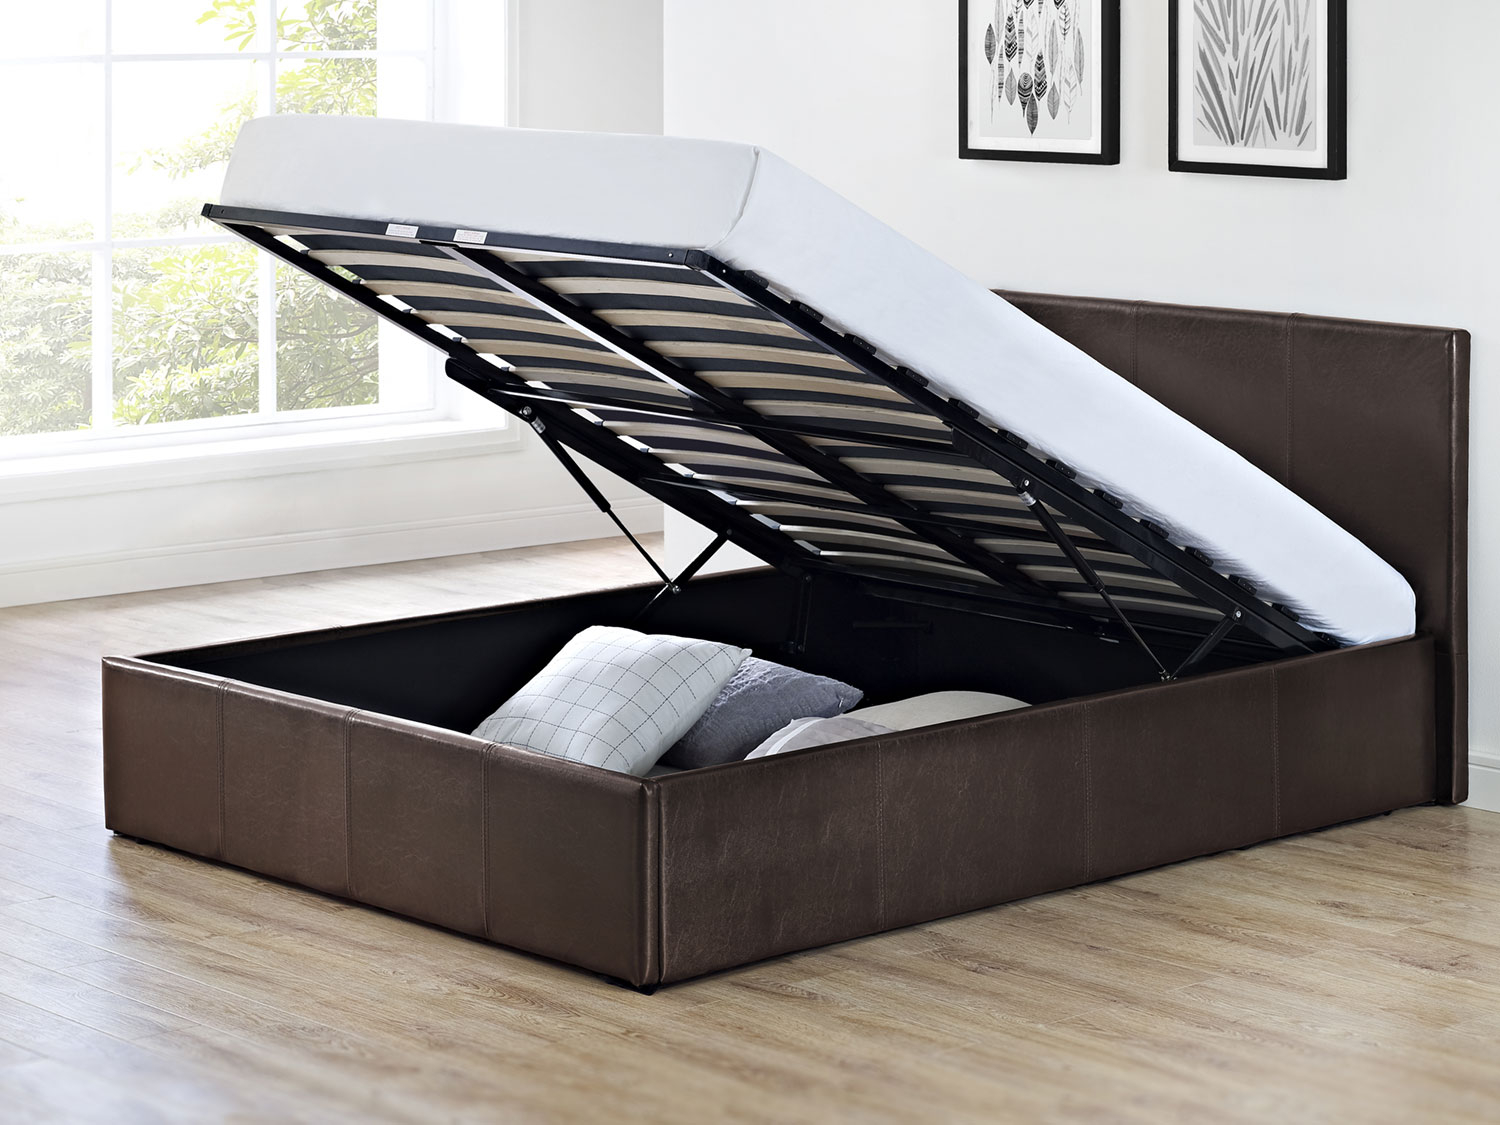 Lift Up Storage Bed Visualhunt, Twin Lift Up Storage Bed